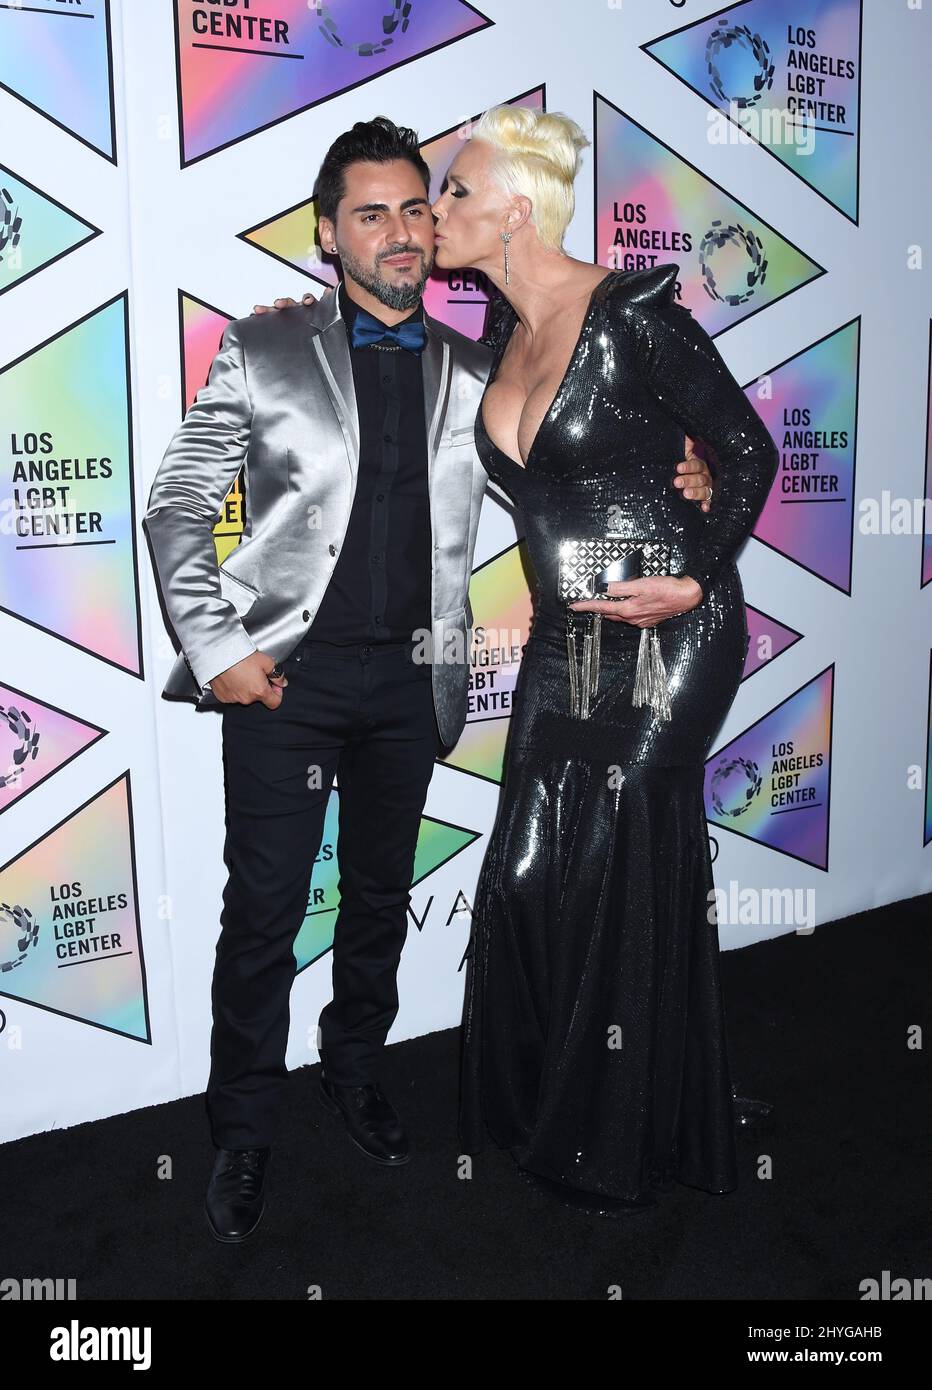 Brigitte Nielsen and Mattia Dess¬ attending the Los Angeles LGBT Center's 49th Anniversary Gala Vanguard Awards held at the Beverly Hilton Hotel in Los Angeles, California Stock Photo